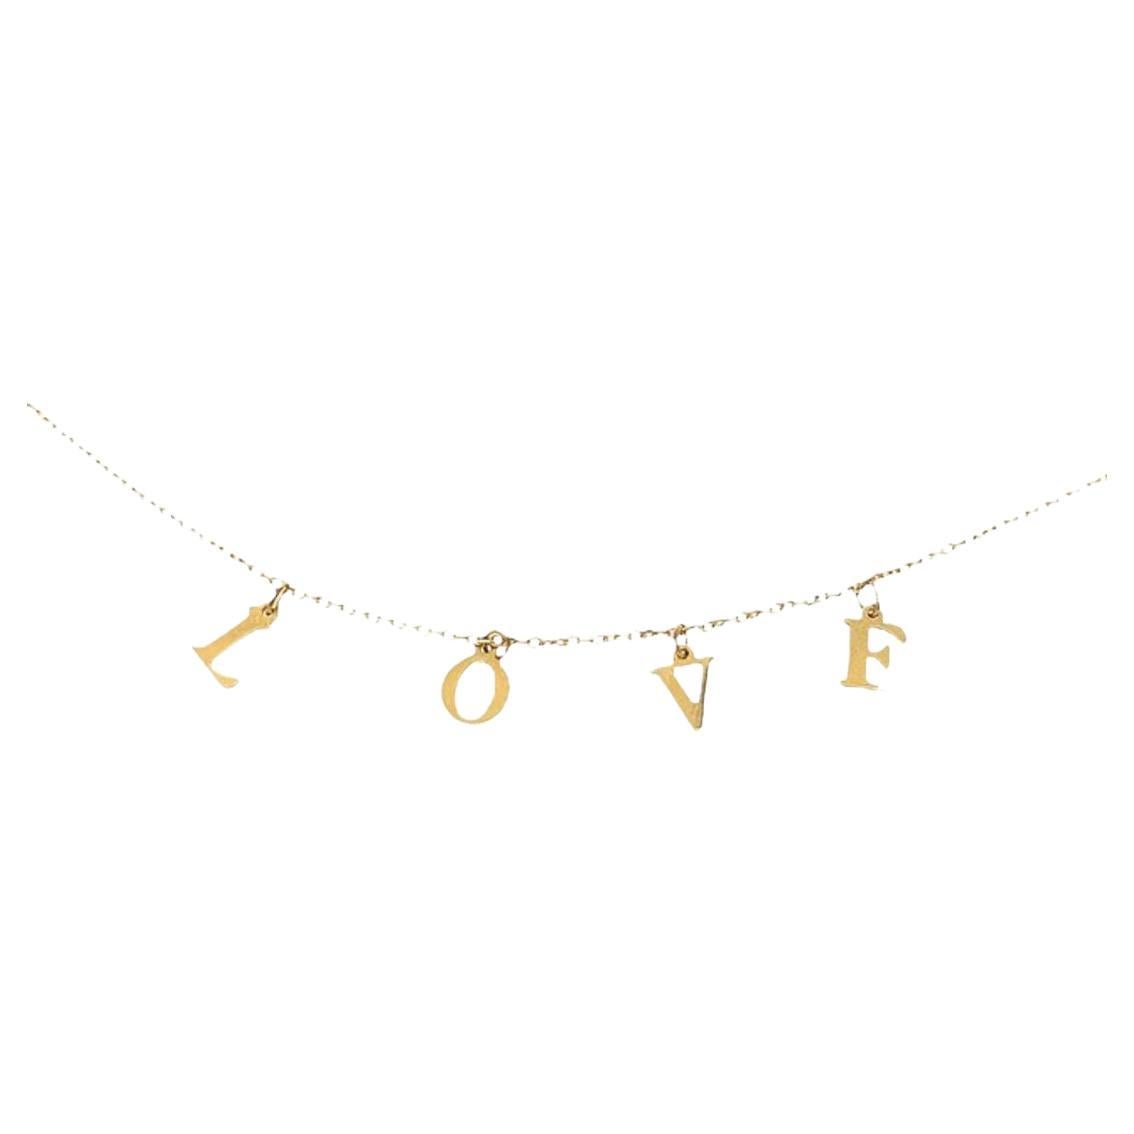 New Love Bracelet on Adjustable Chain in 18ct Yellow Gold For Sale